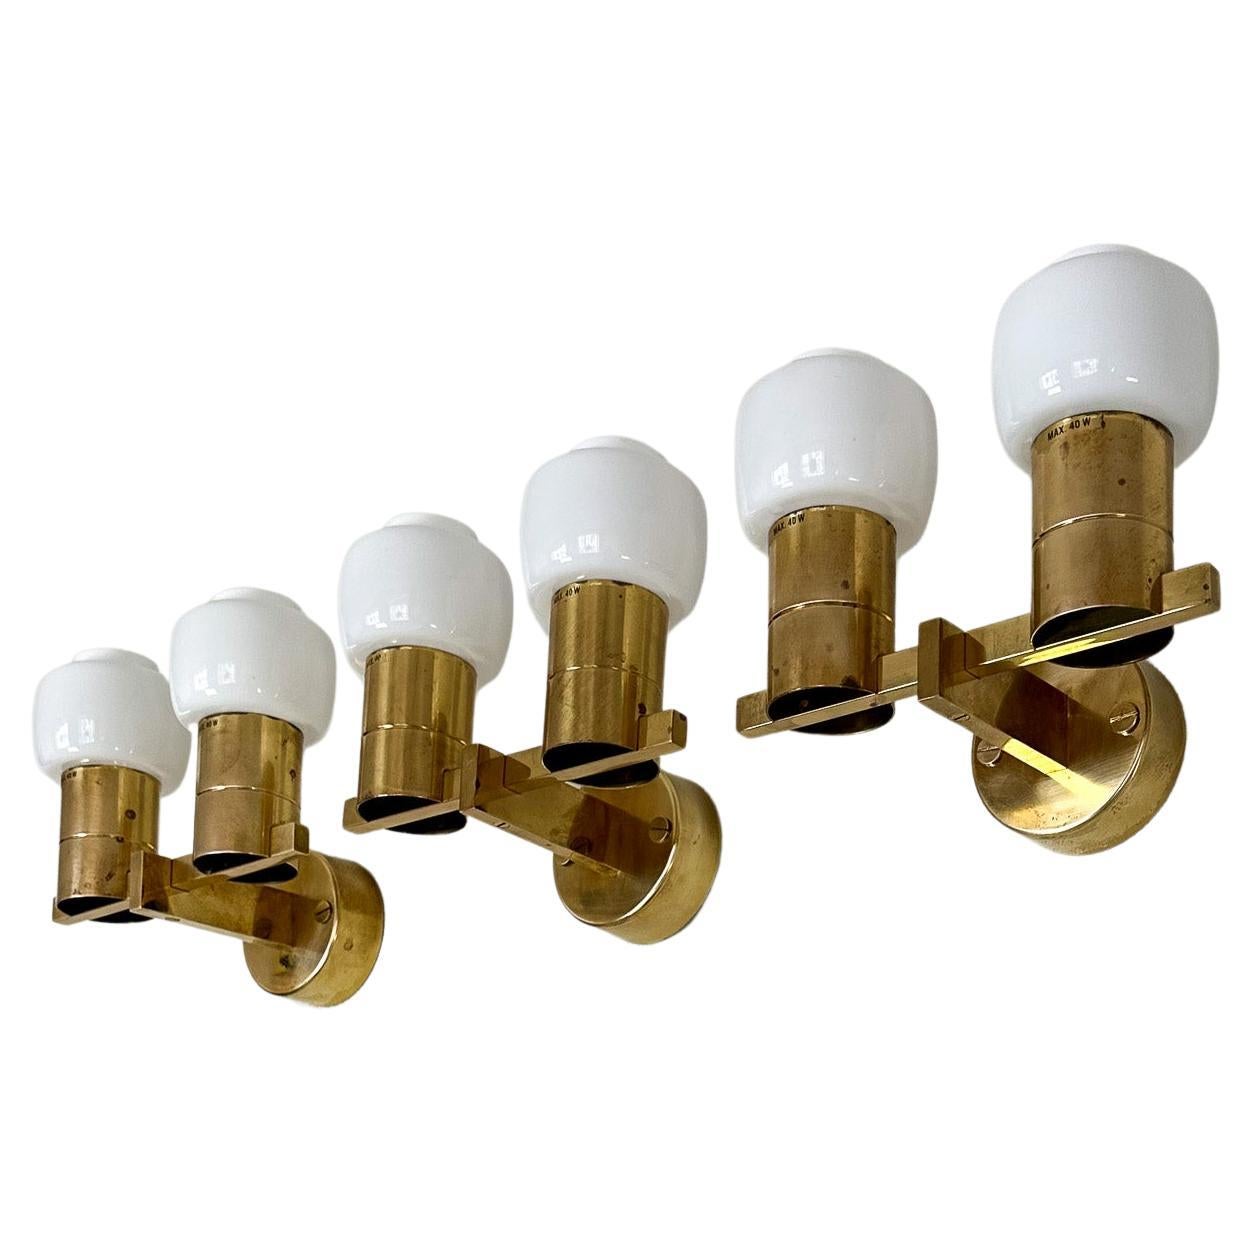 Midcentury Hans-Agne Jakobsson Brass and Opaline Glass Wall Lamps, Sweden, 1960s For Sale